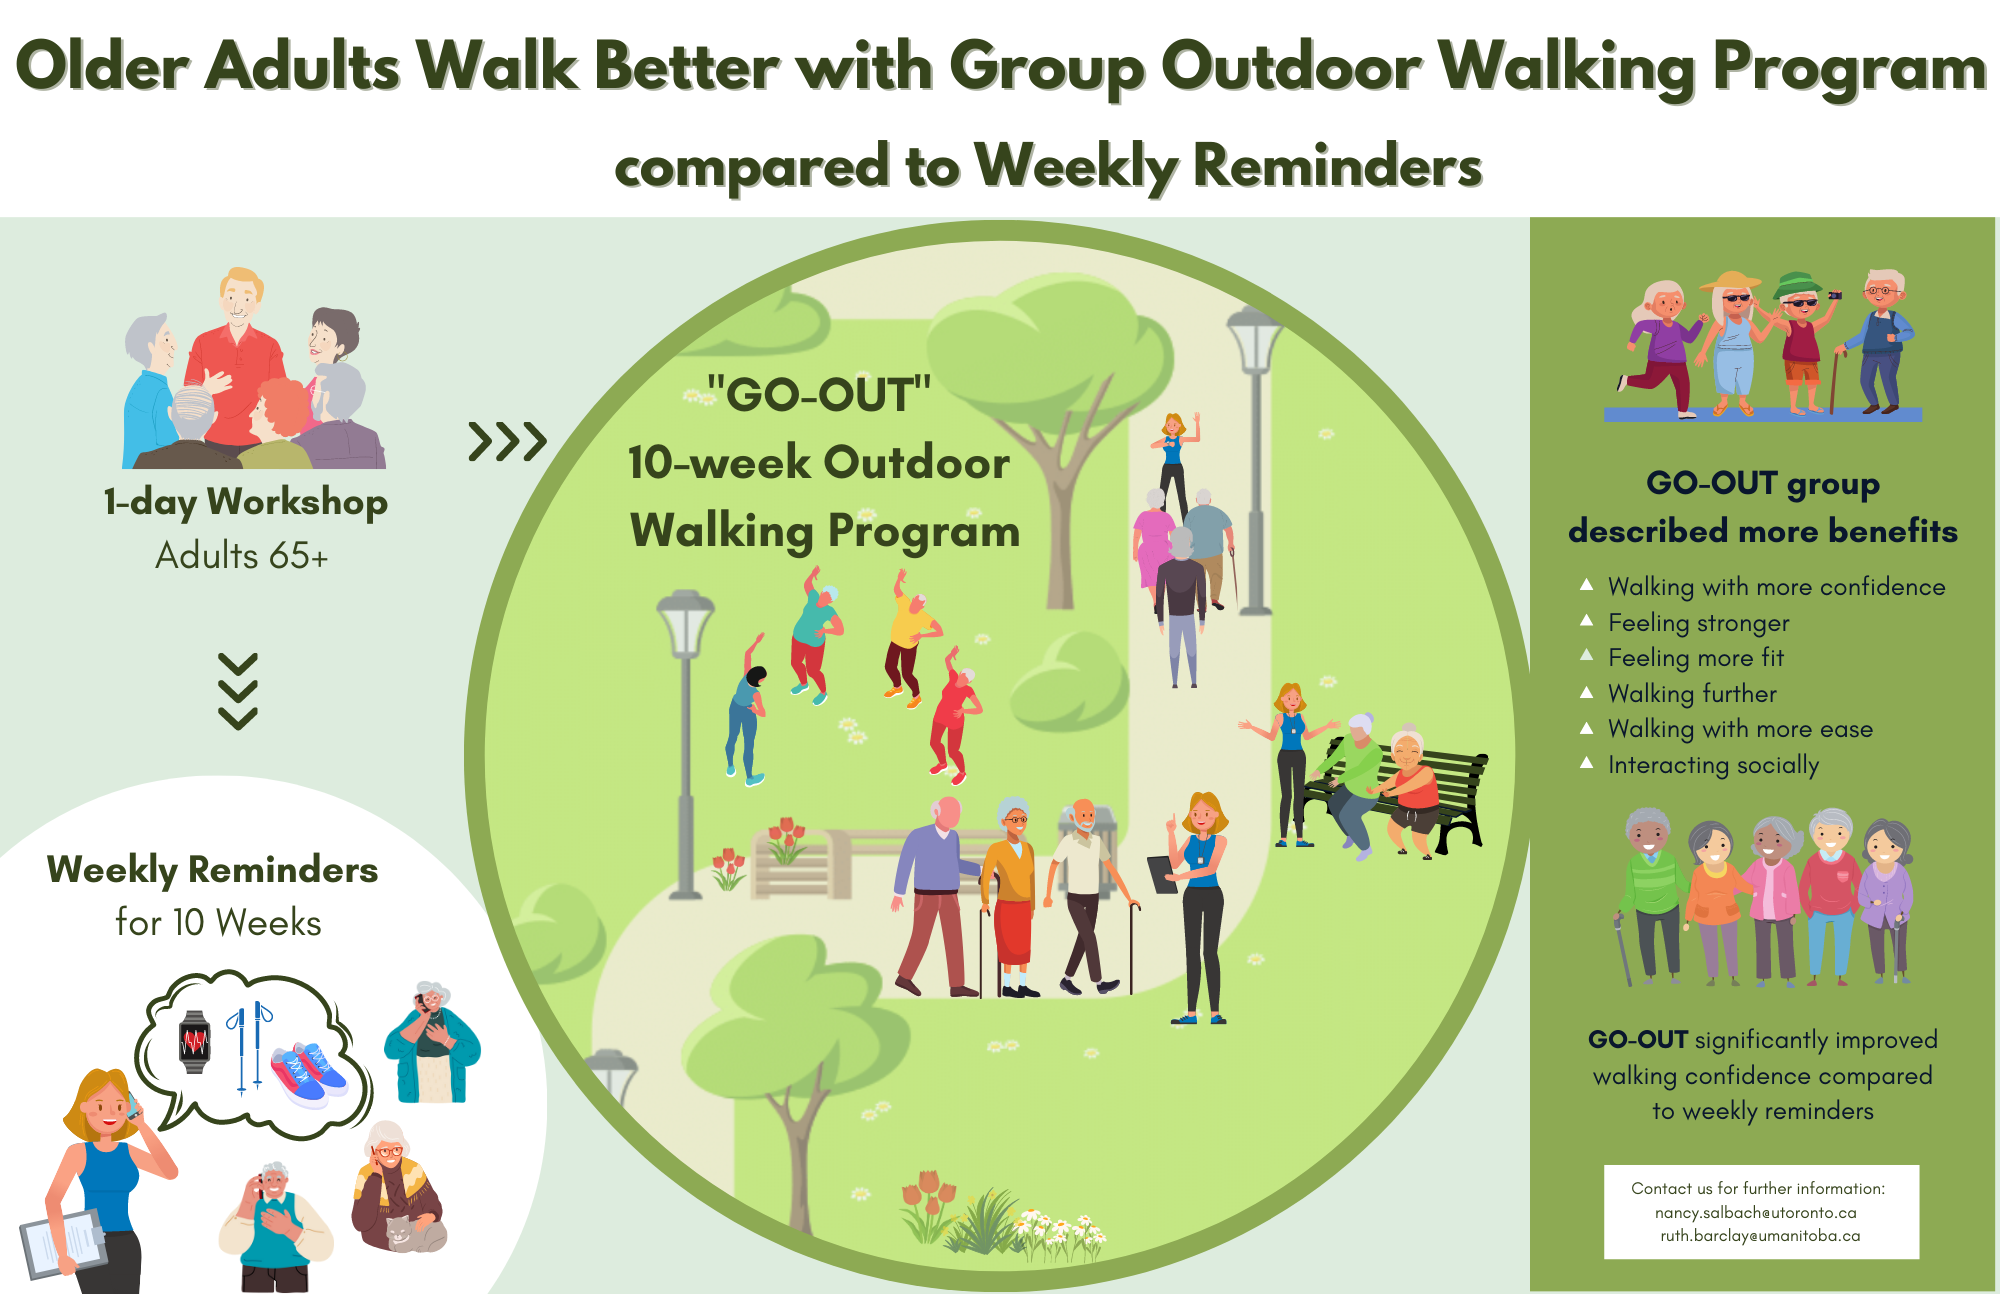 ”Older Adults Walk Better with Group Outdoor Walking Program compared to Weekly Reminders” is shown above an infographic. “1-day Workshop, Adults 65+” is shown underneath a group of older adults talking. “Weekly Reminders for 10 Weeks” is shown above an instructor telephoning 3 older adults. “GO-OUT 10-week Outdoor Walking Program” is shown within a park in which an instructor is leading a group of older adults through warm-up and walking.